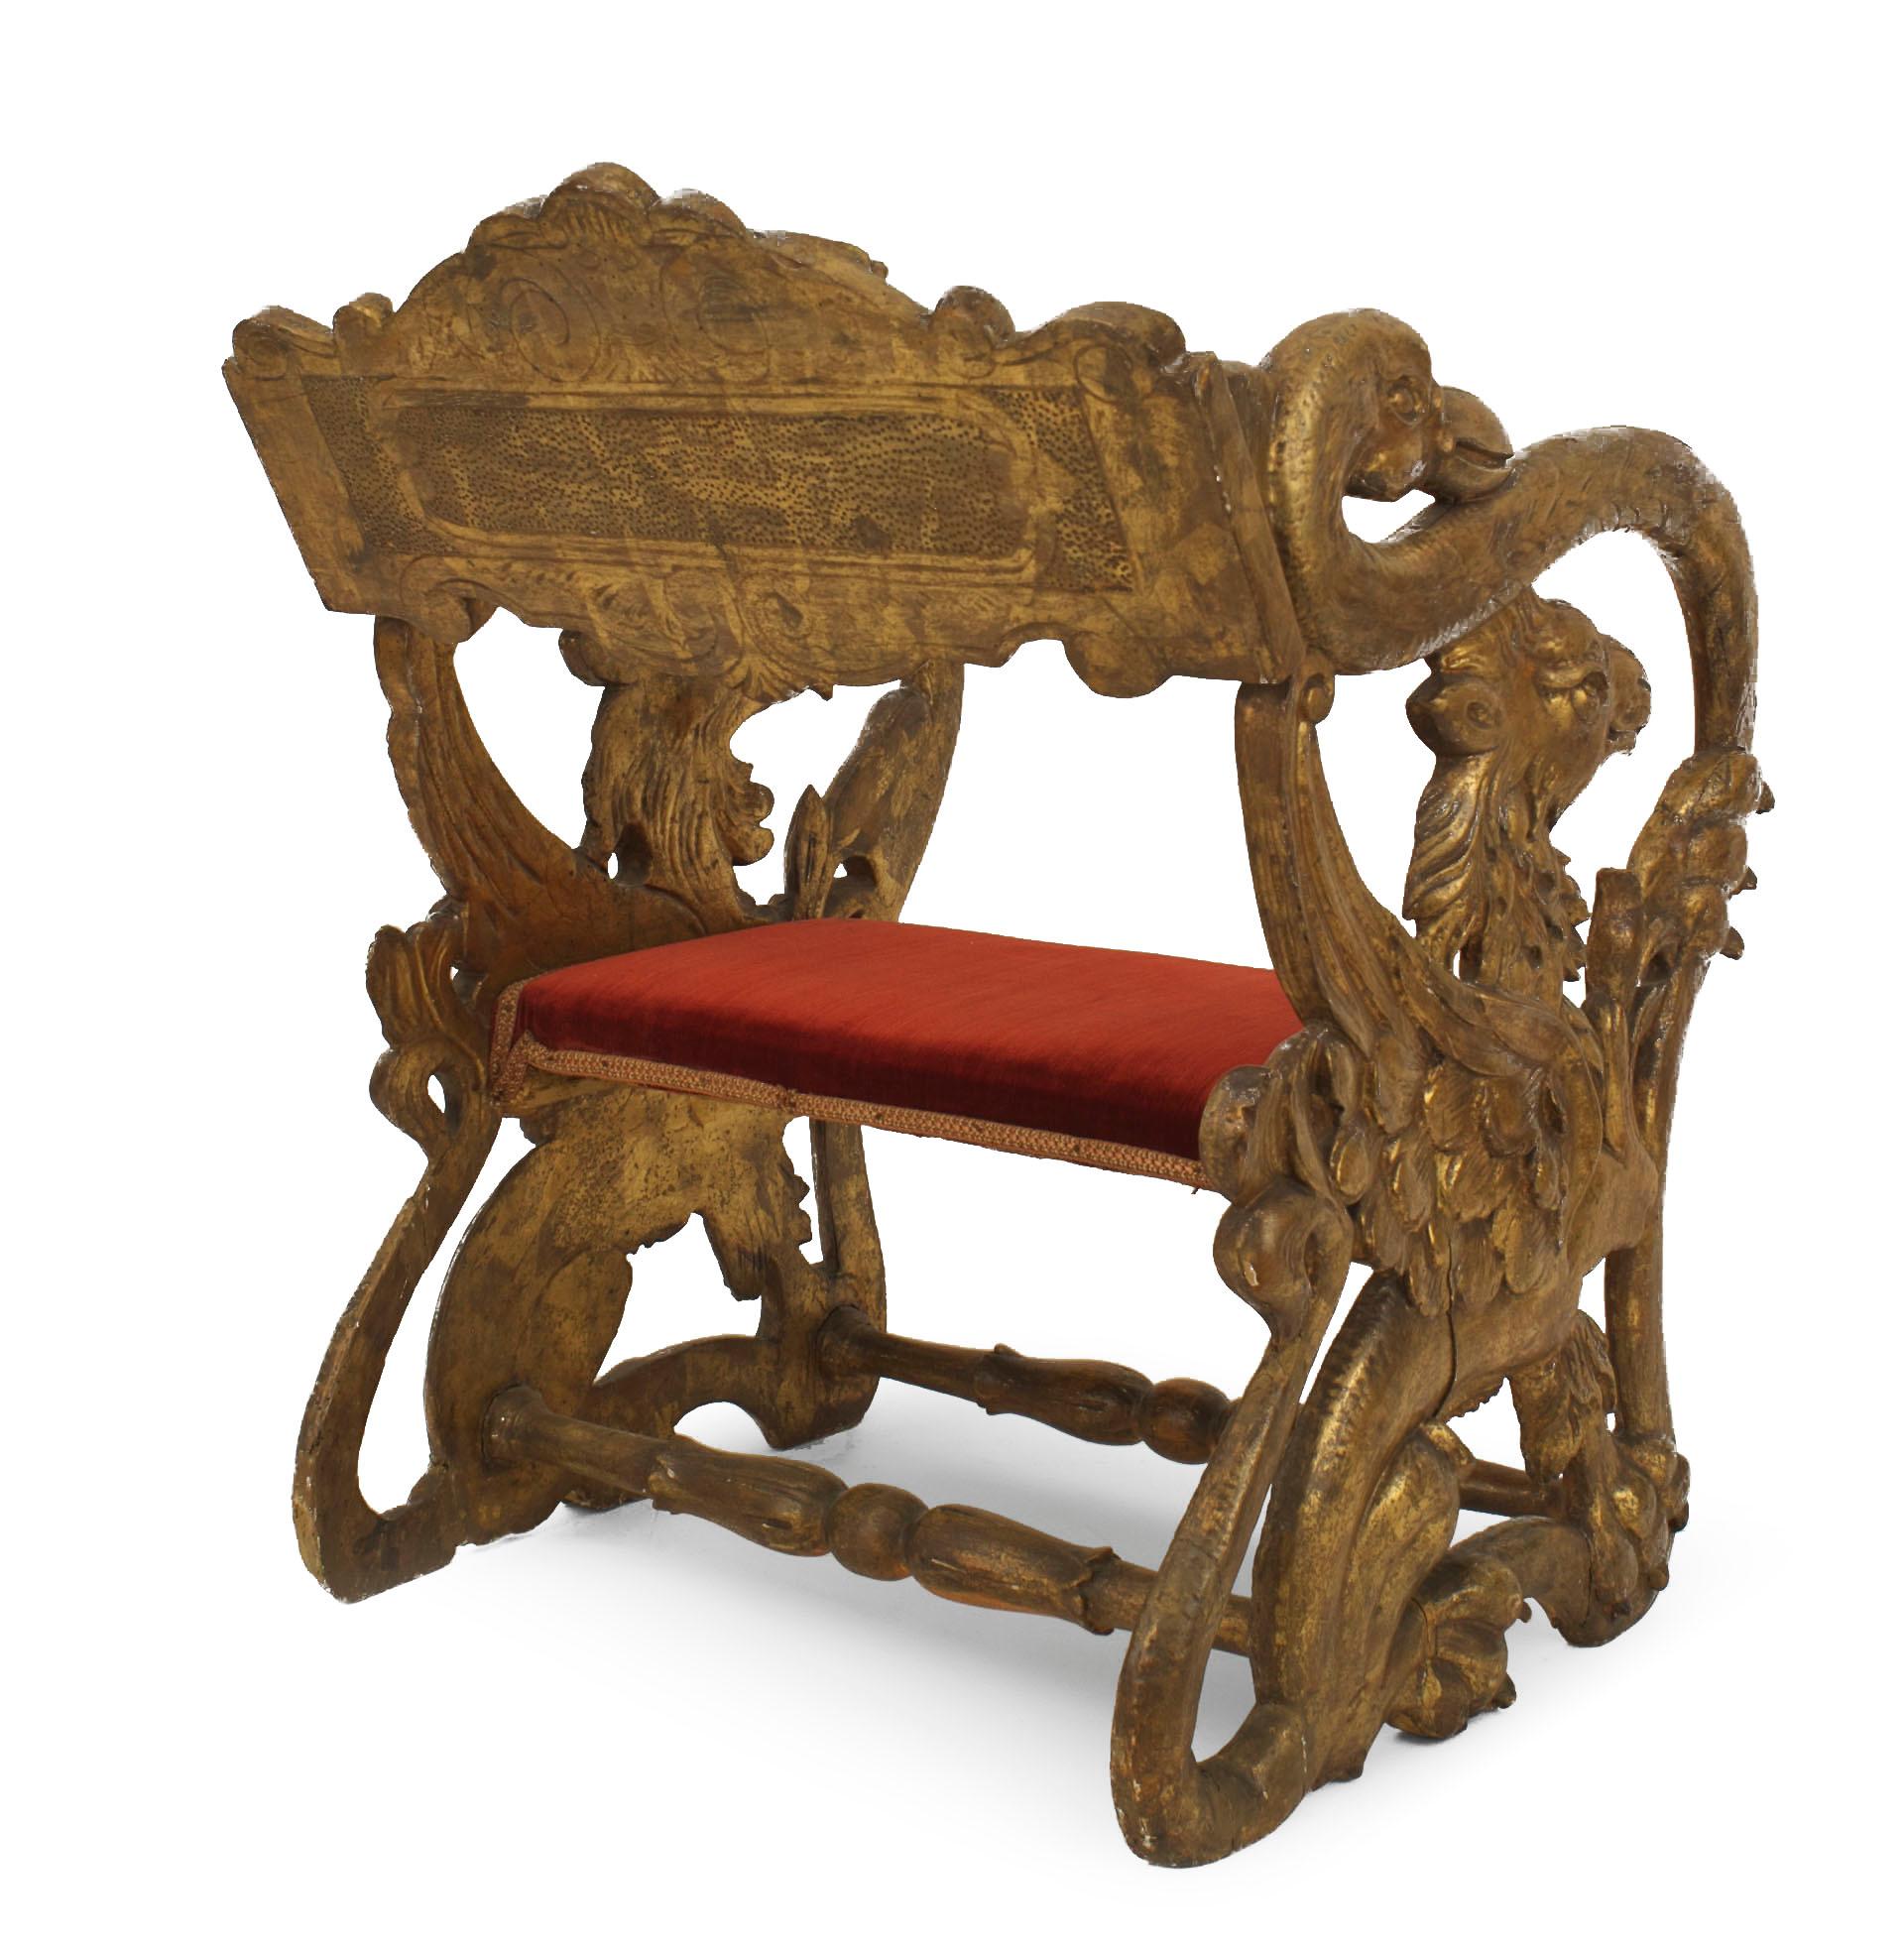 rare jester's chair